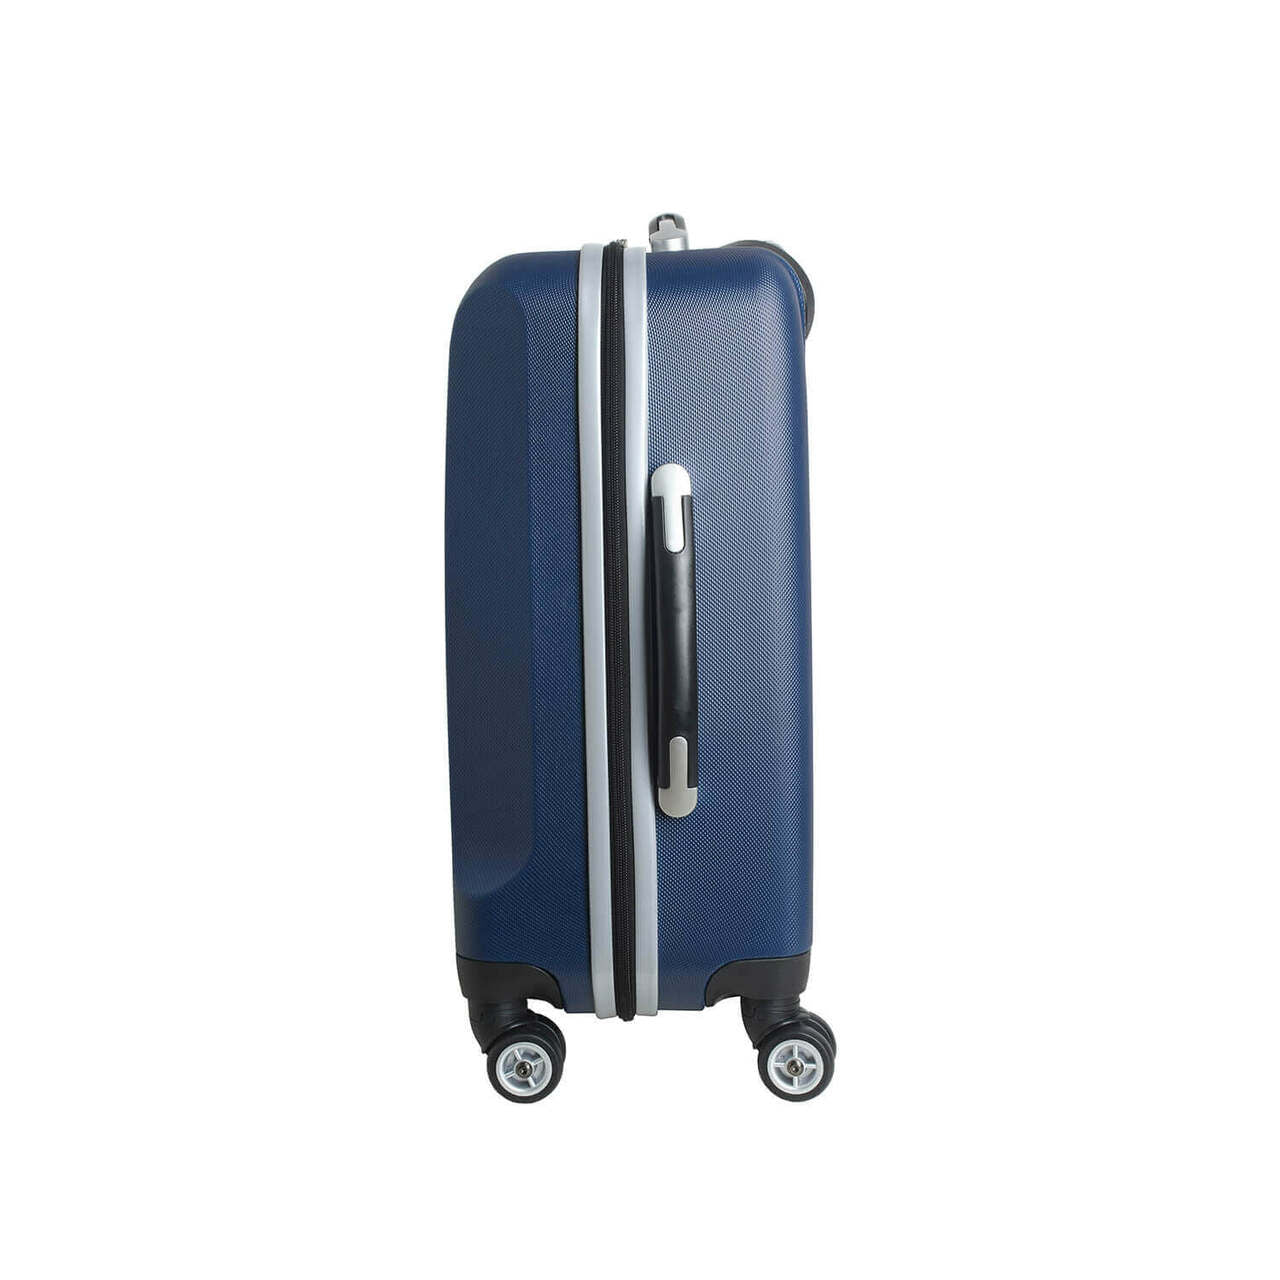 Detroit Red Wings 20" Navy Domestic Carry-on Spinner